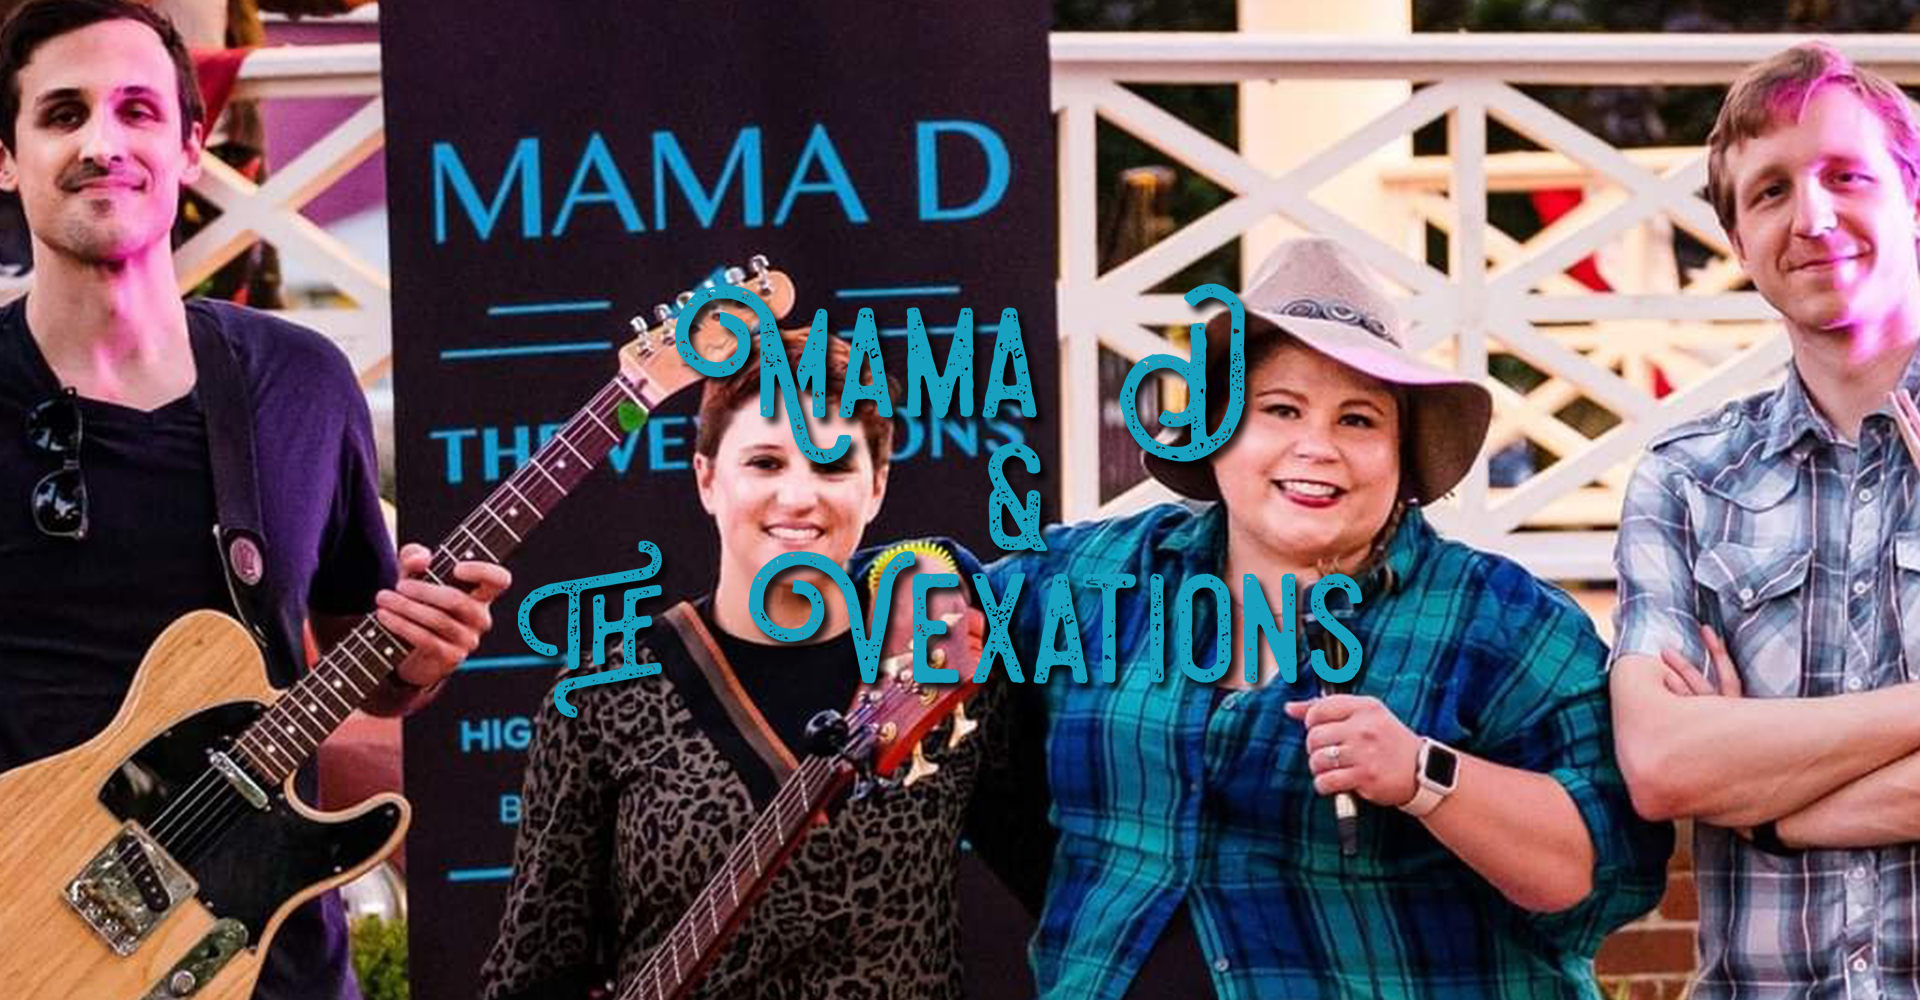 Mama D & The Vexations